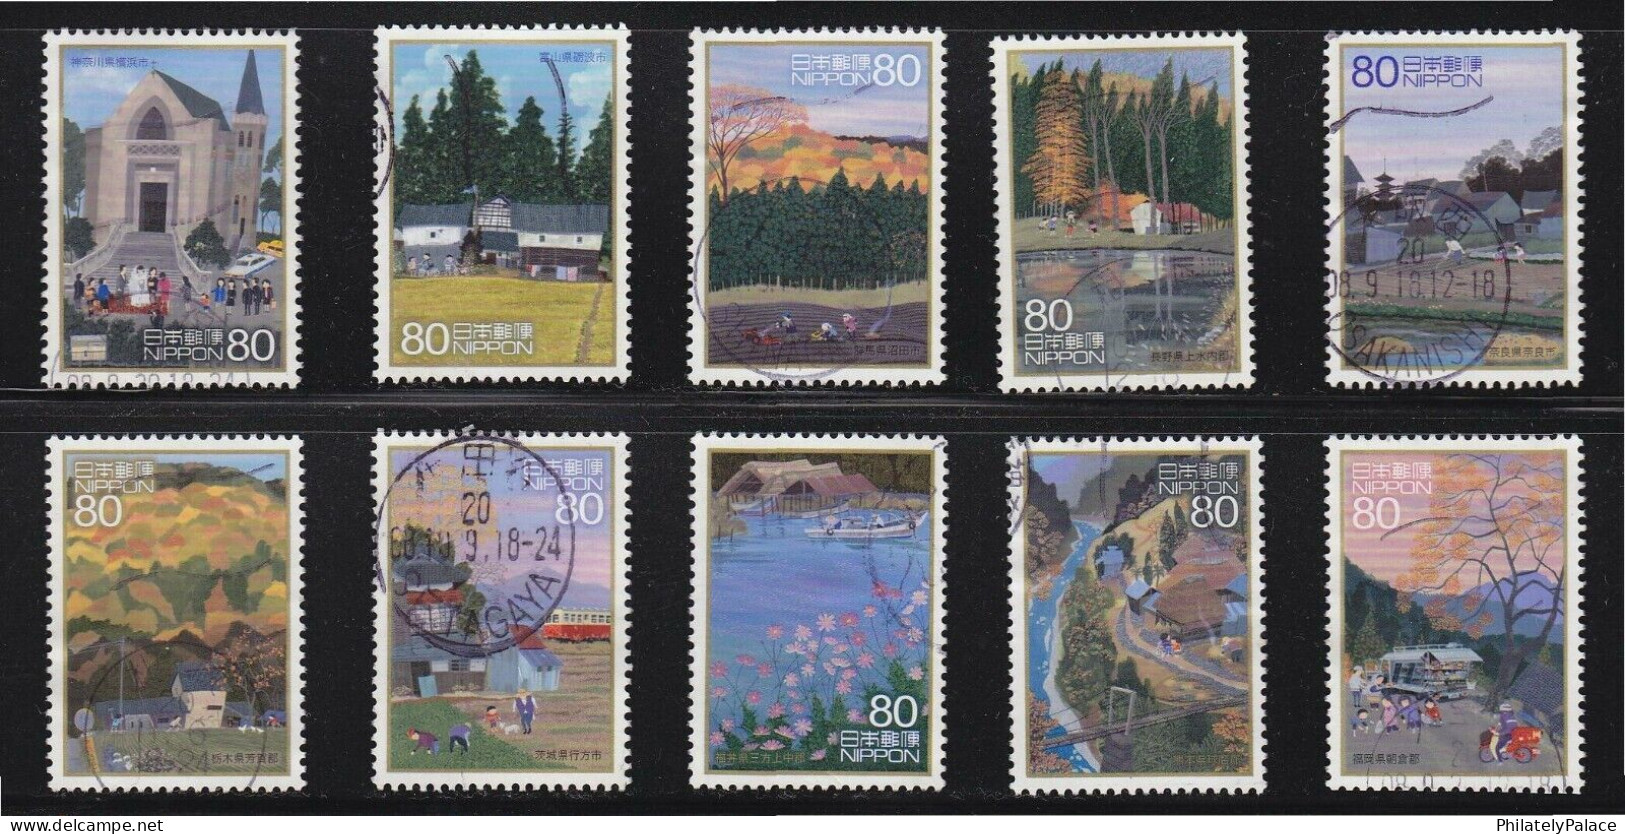 JAPAN 2008 (PREFECTURE) HOMETOWNS SCENES IN MY HEART (SUMMER) S1 10 STAMPS USED (**) - Used Stamps